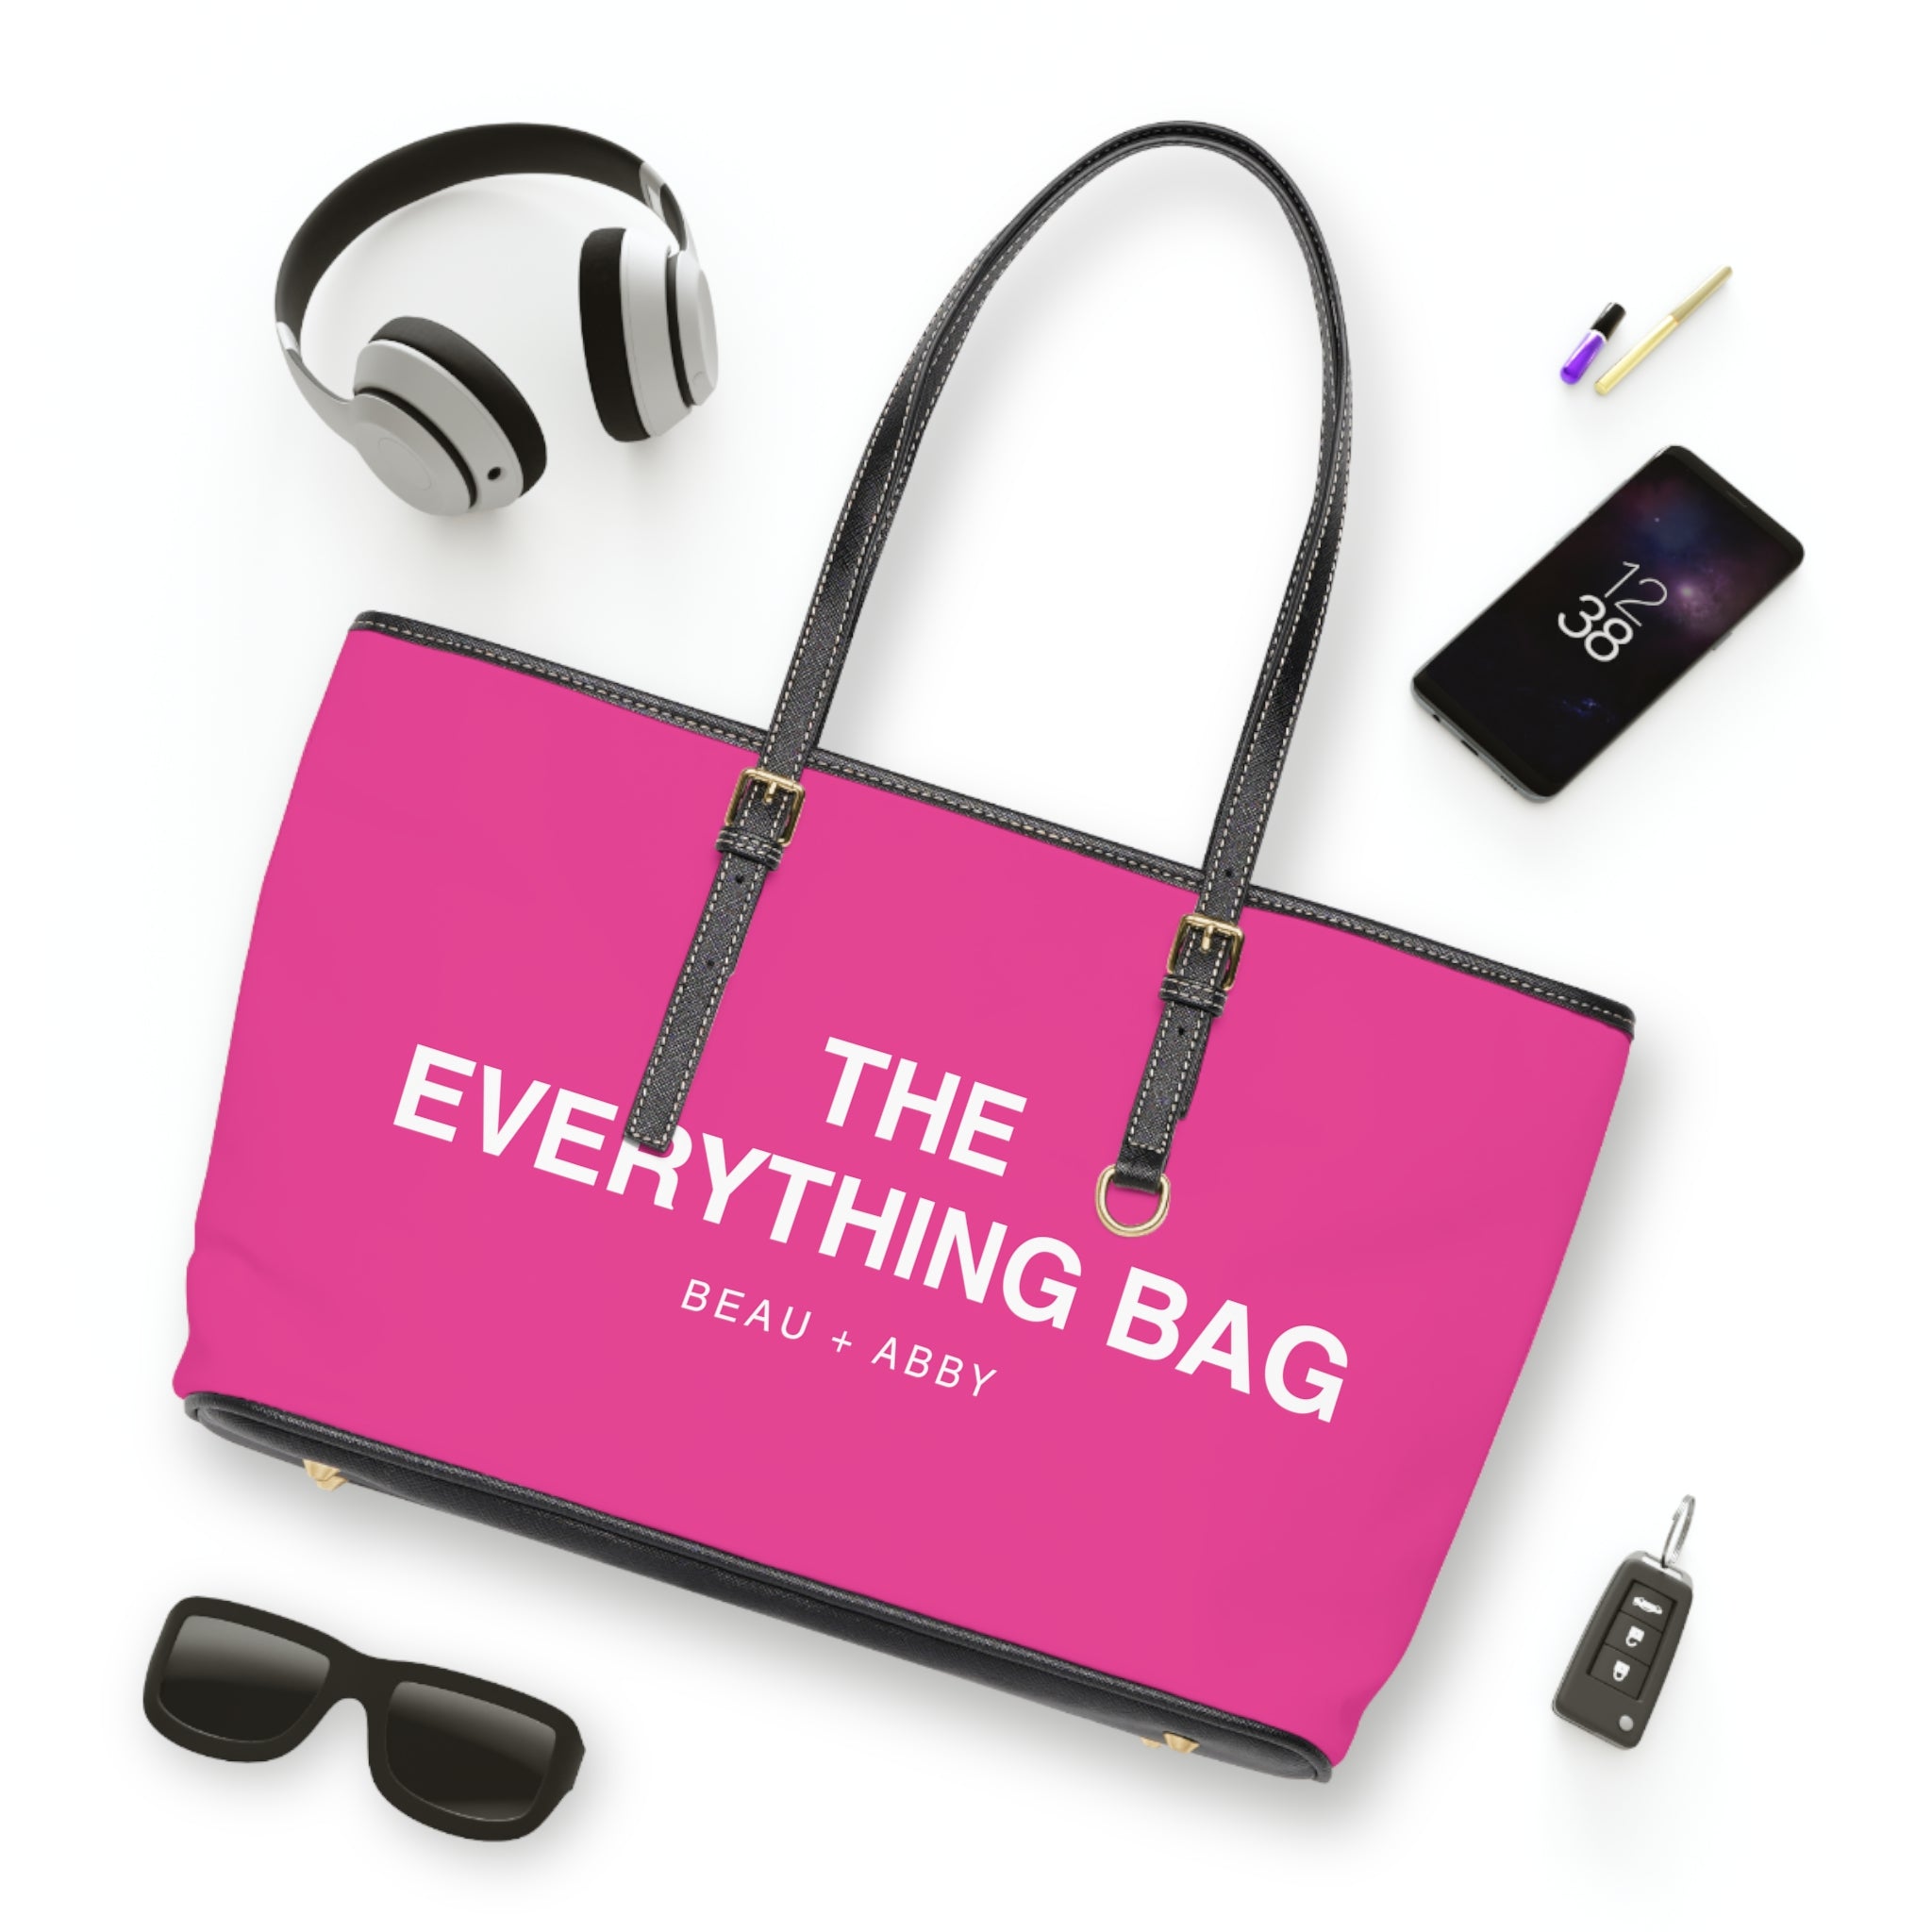  Casual Wear Accessories "Everything Bag" PU Leather Shoulder Bag in Barbie Pink, Tote Bag Bags